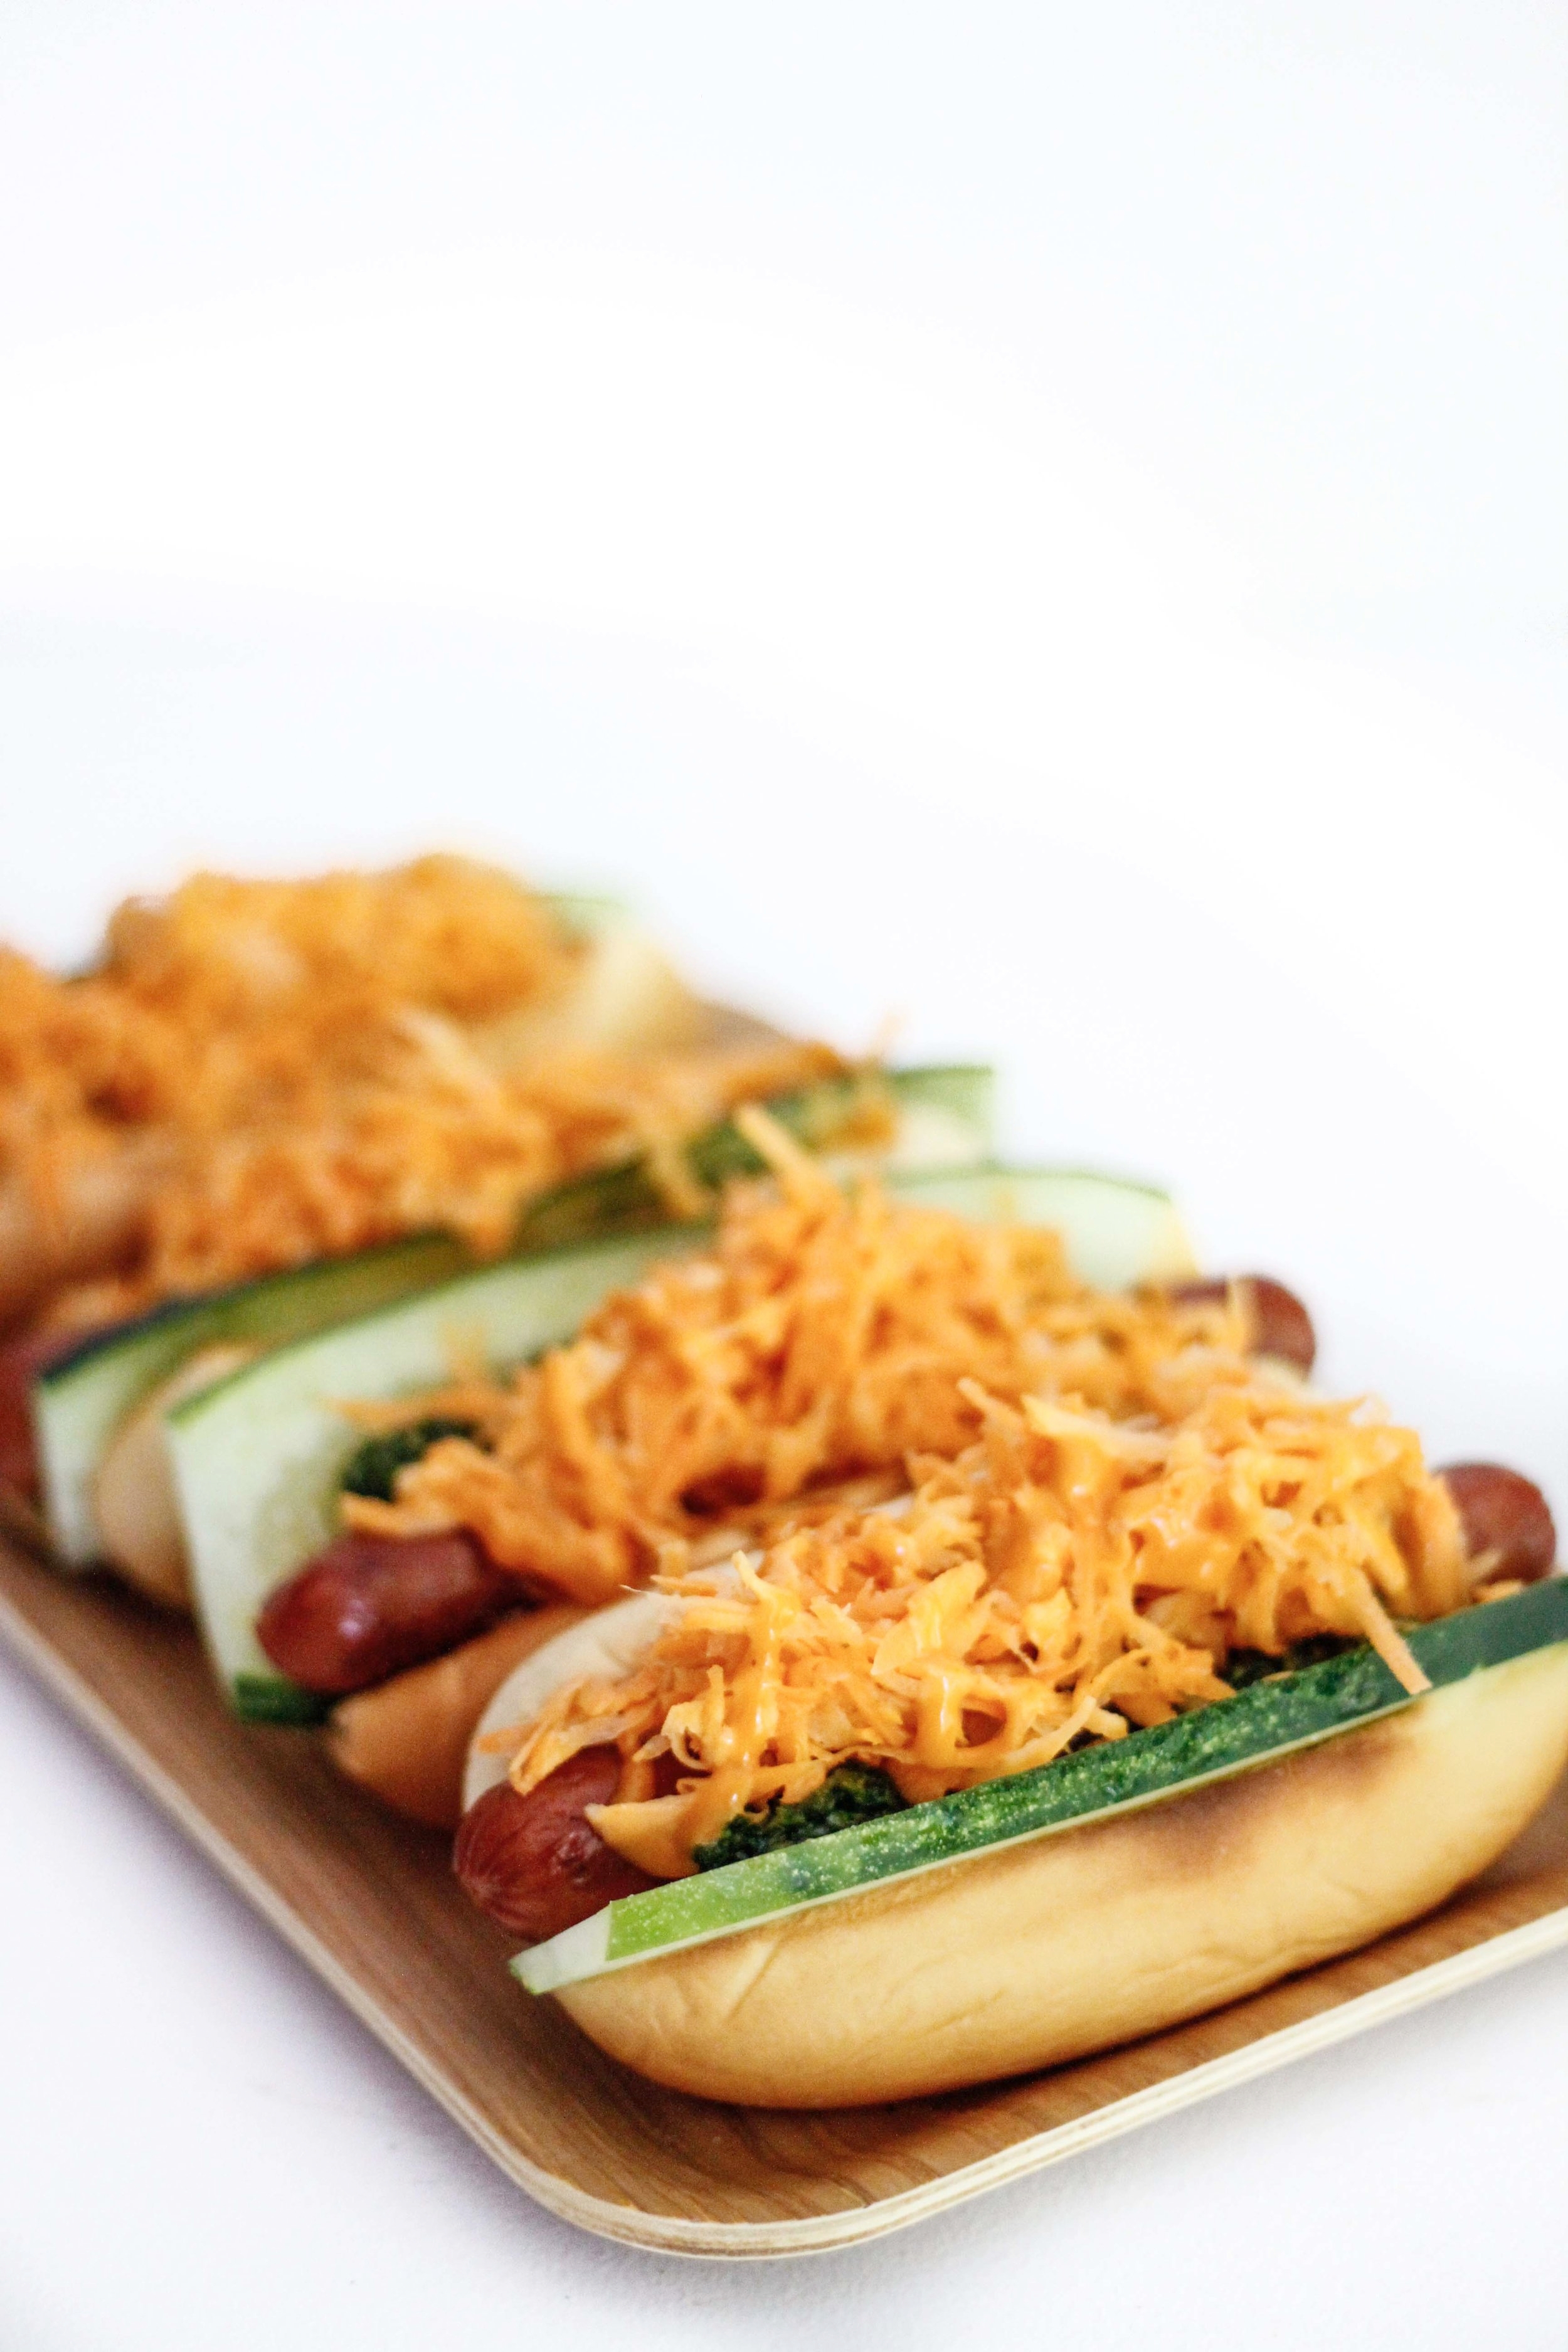 Banh mi-style hot dogs